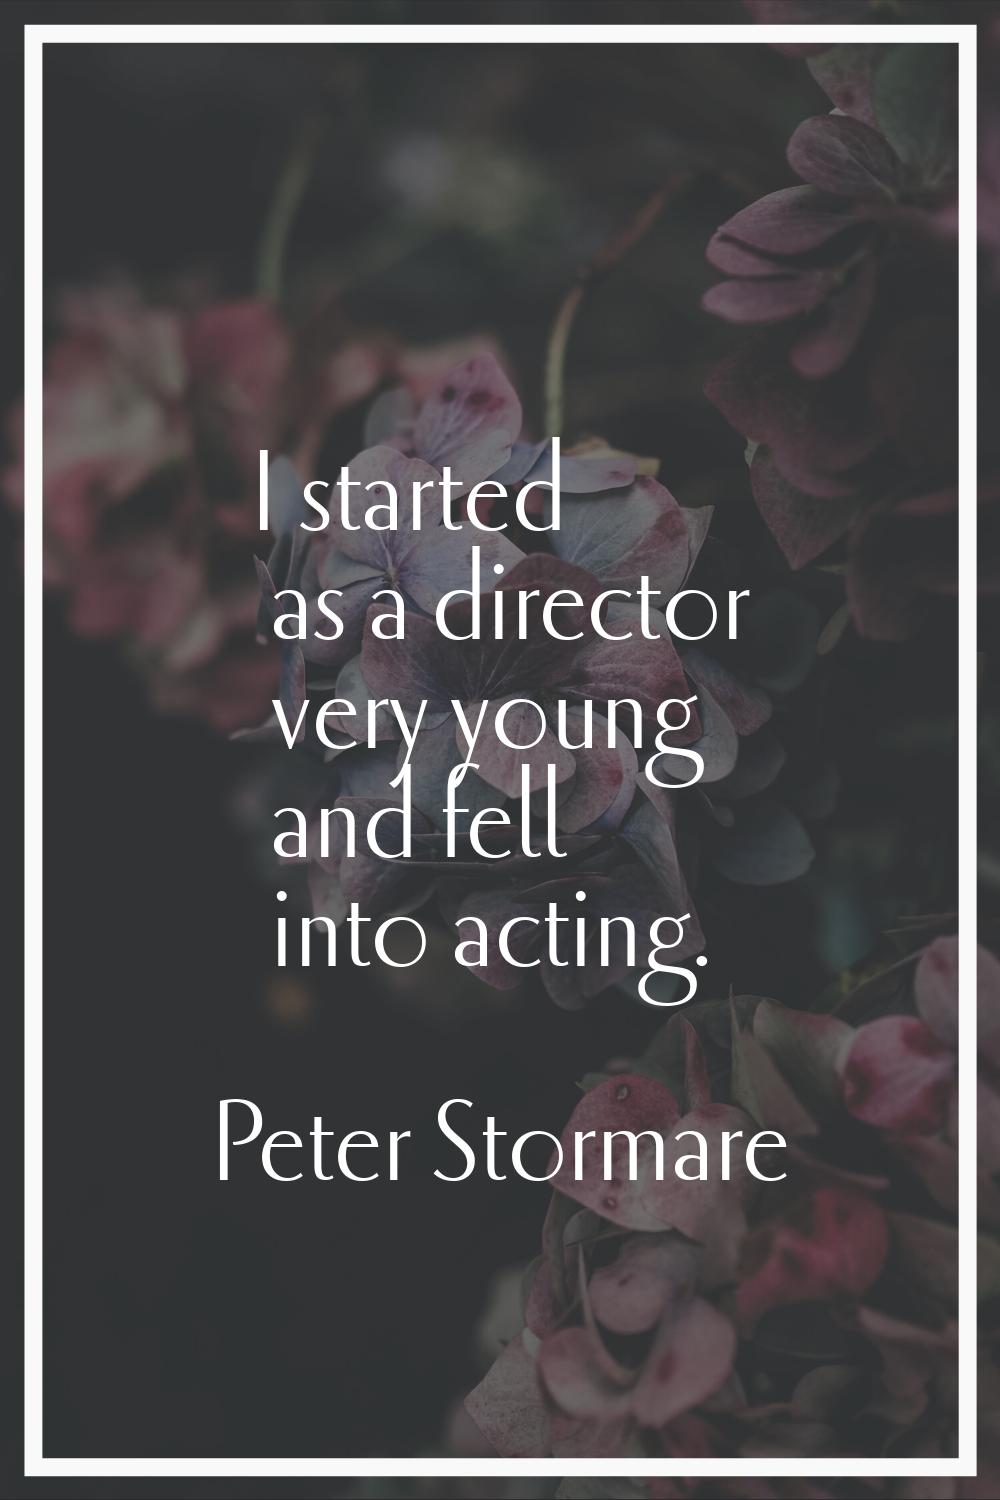 I started as a director very young and fell into acting.